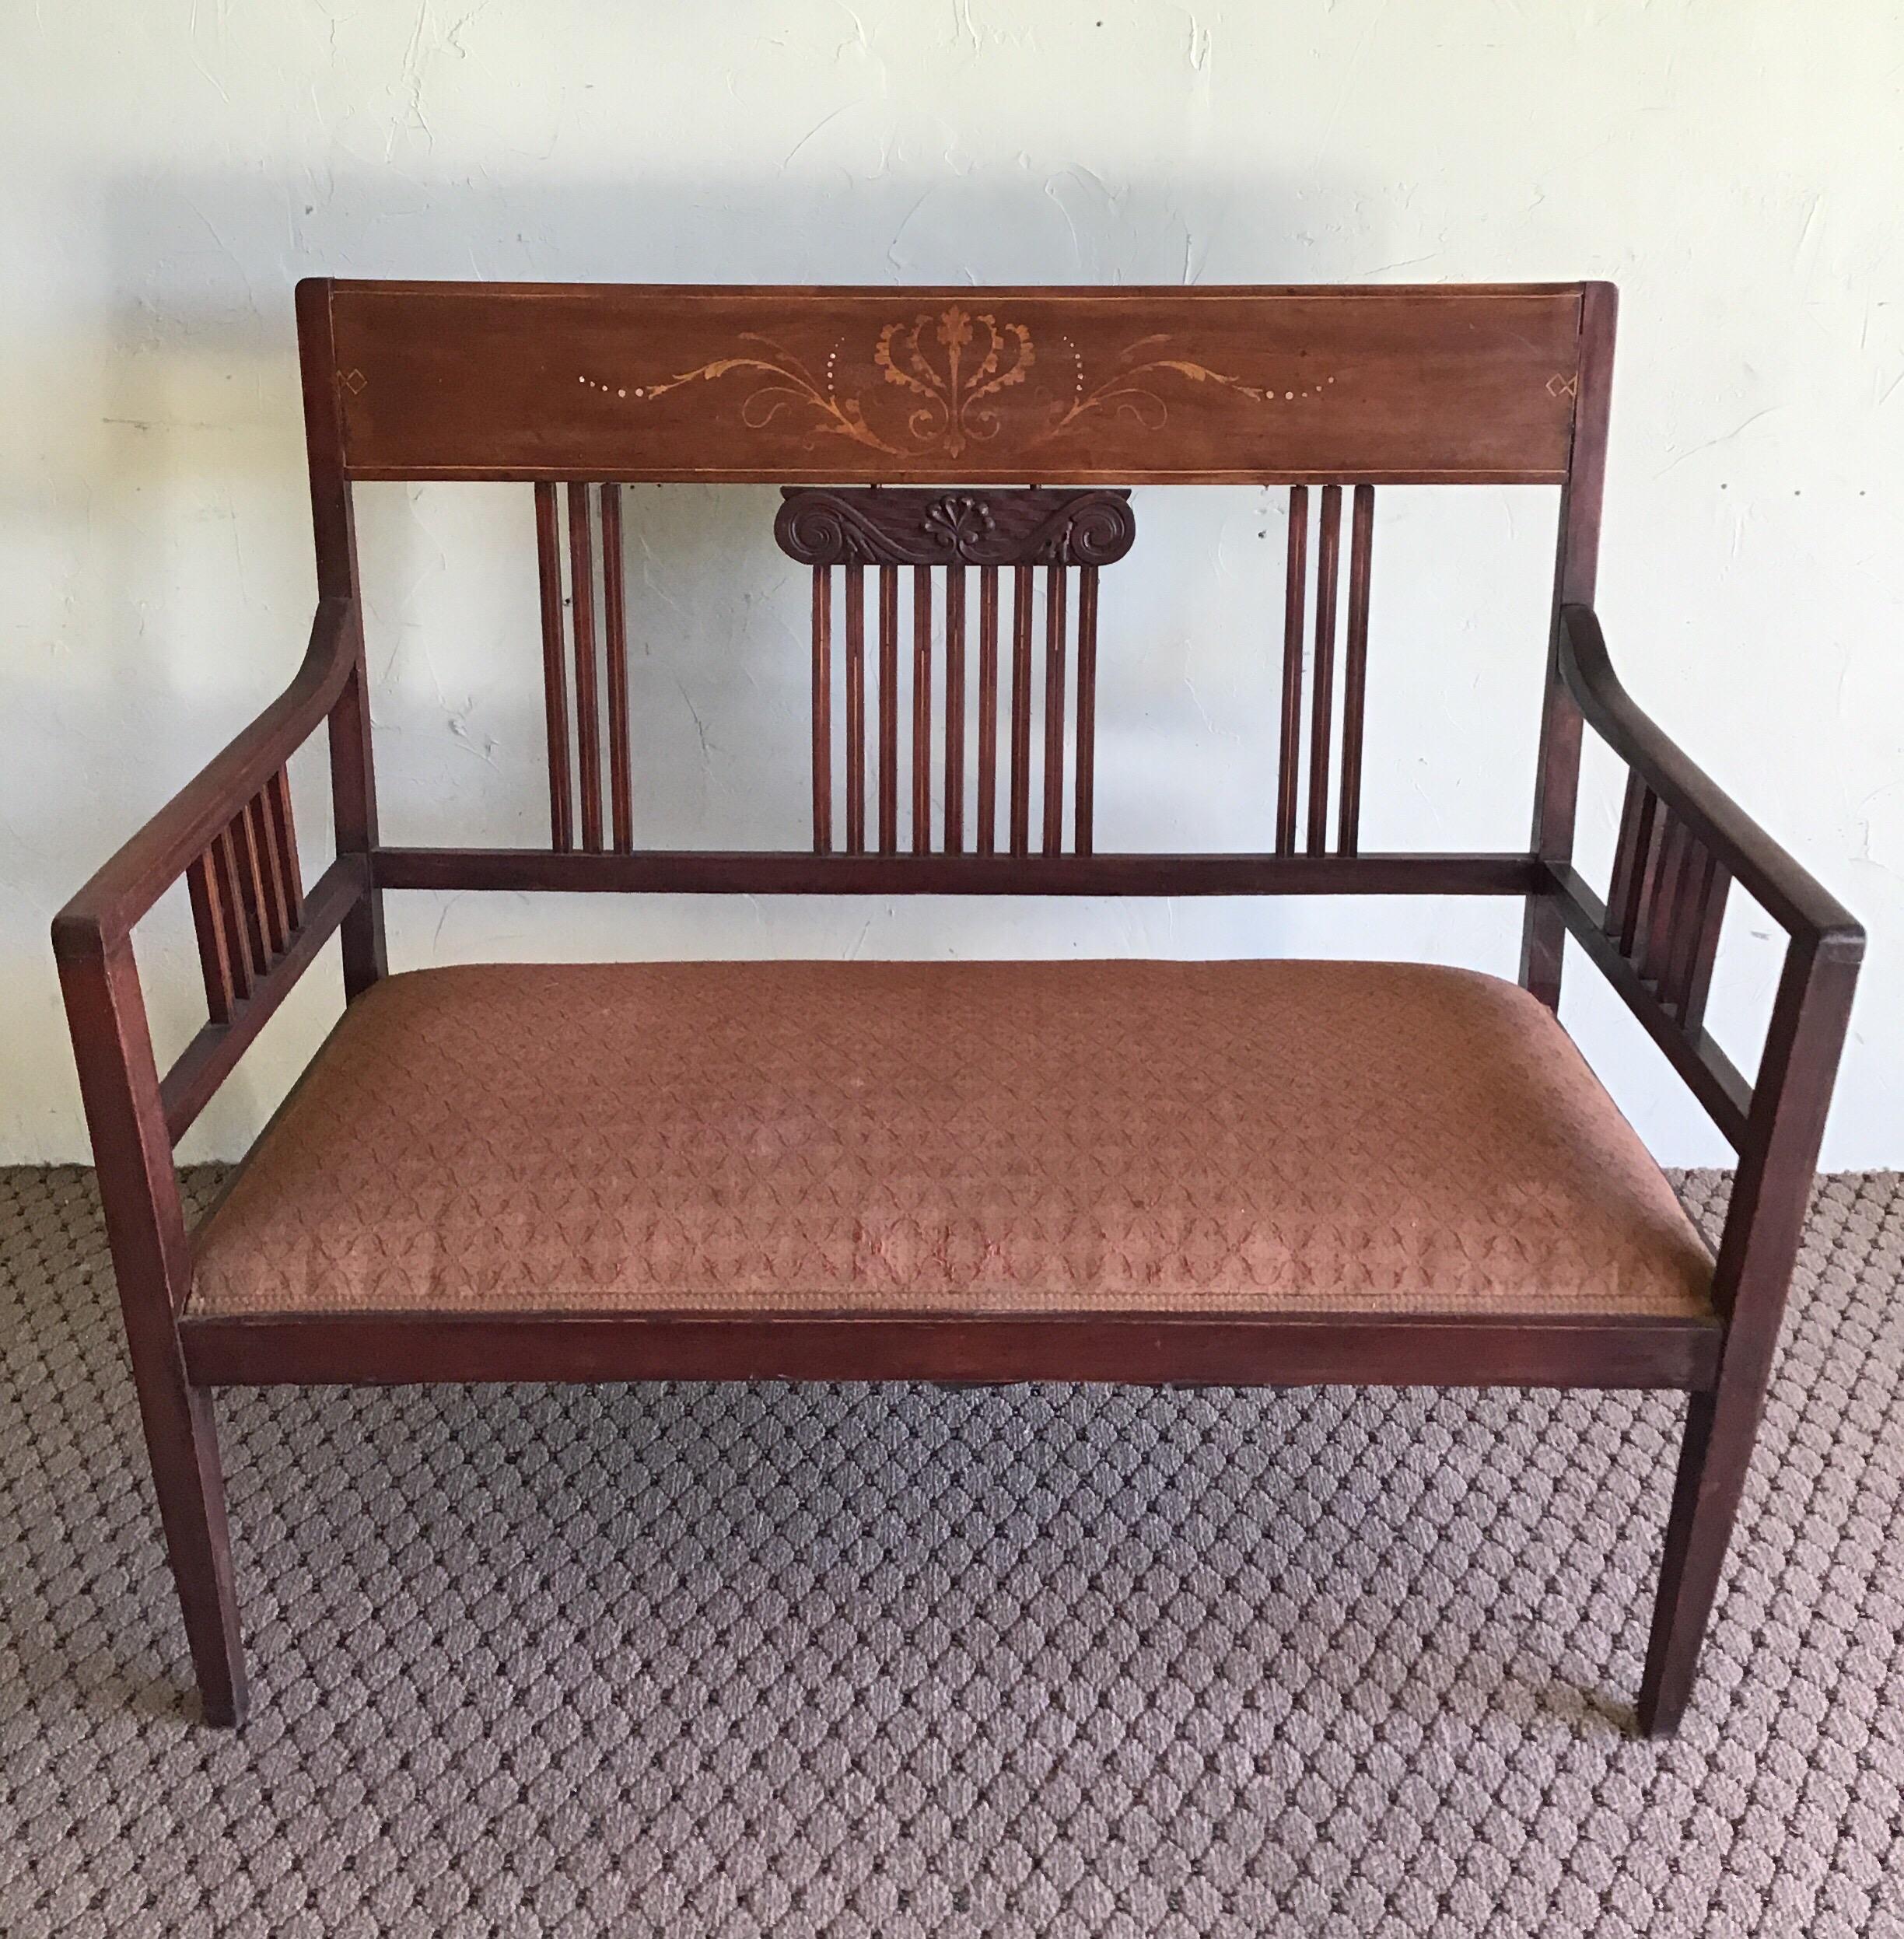 1-6001
English upholstered hall bench with inlay ed fruitwood design
Has original fabric
Measures: Seat height 22